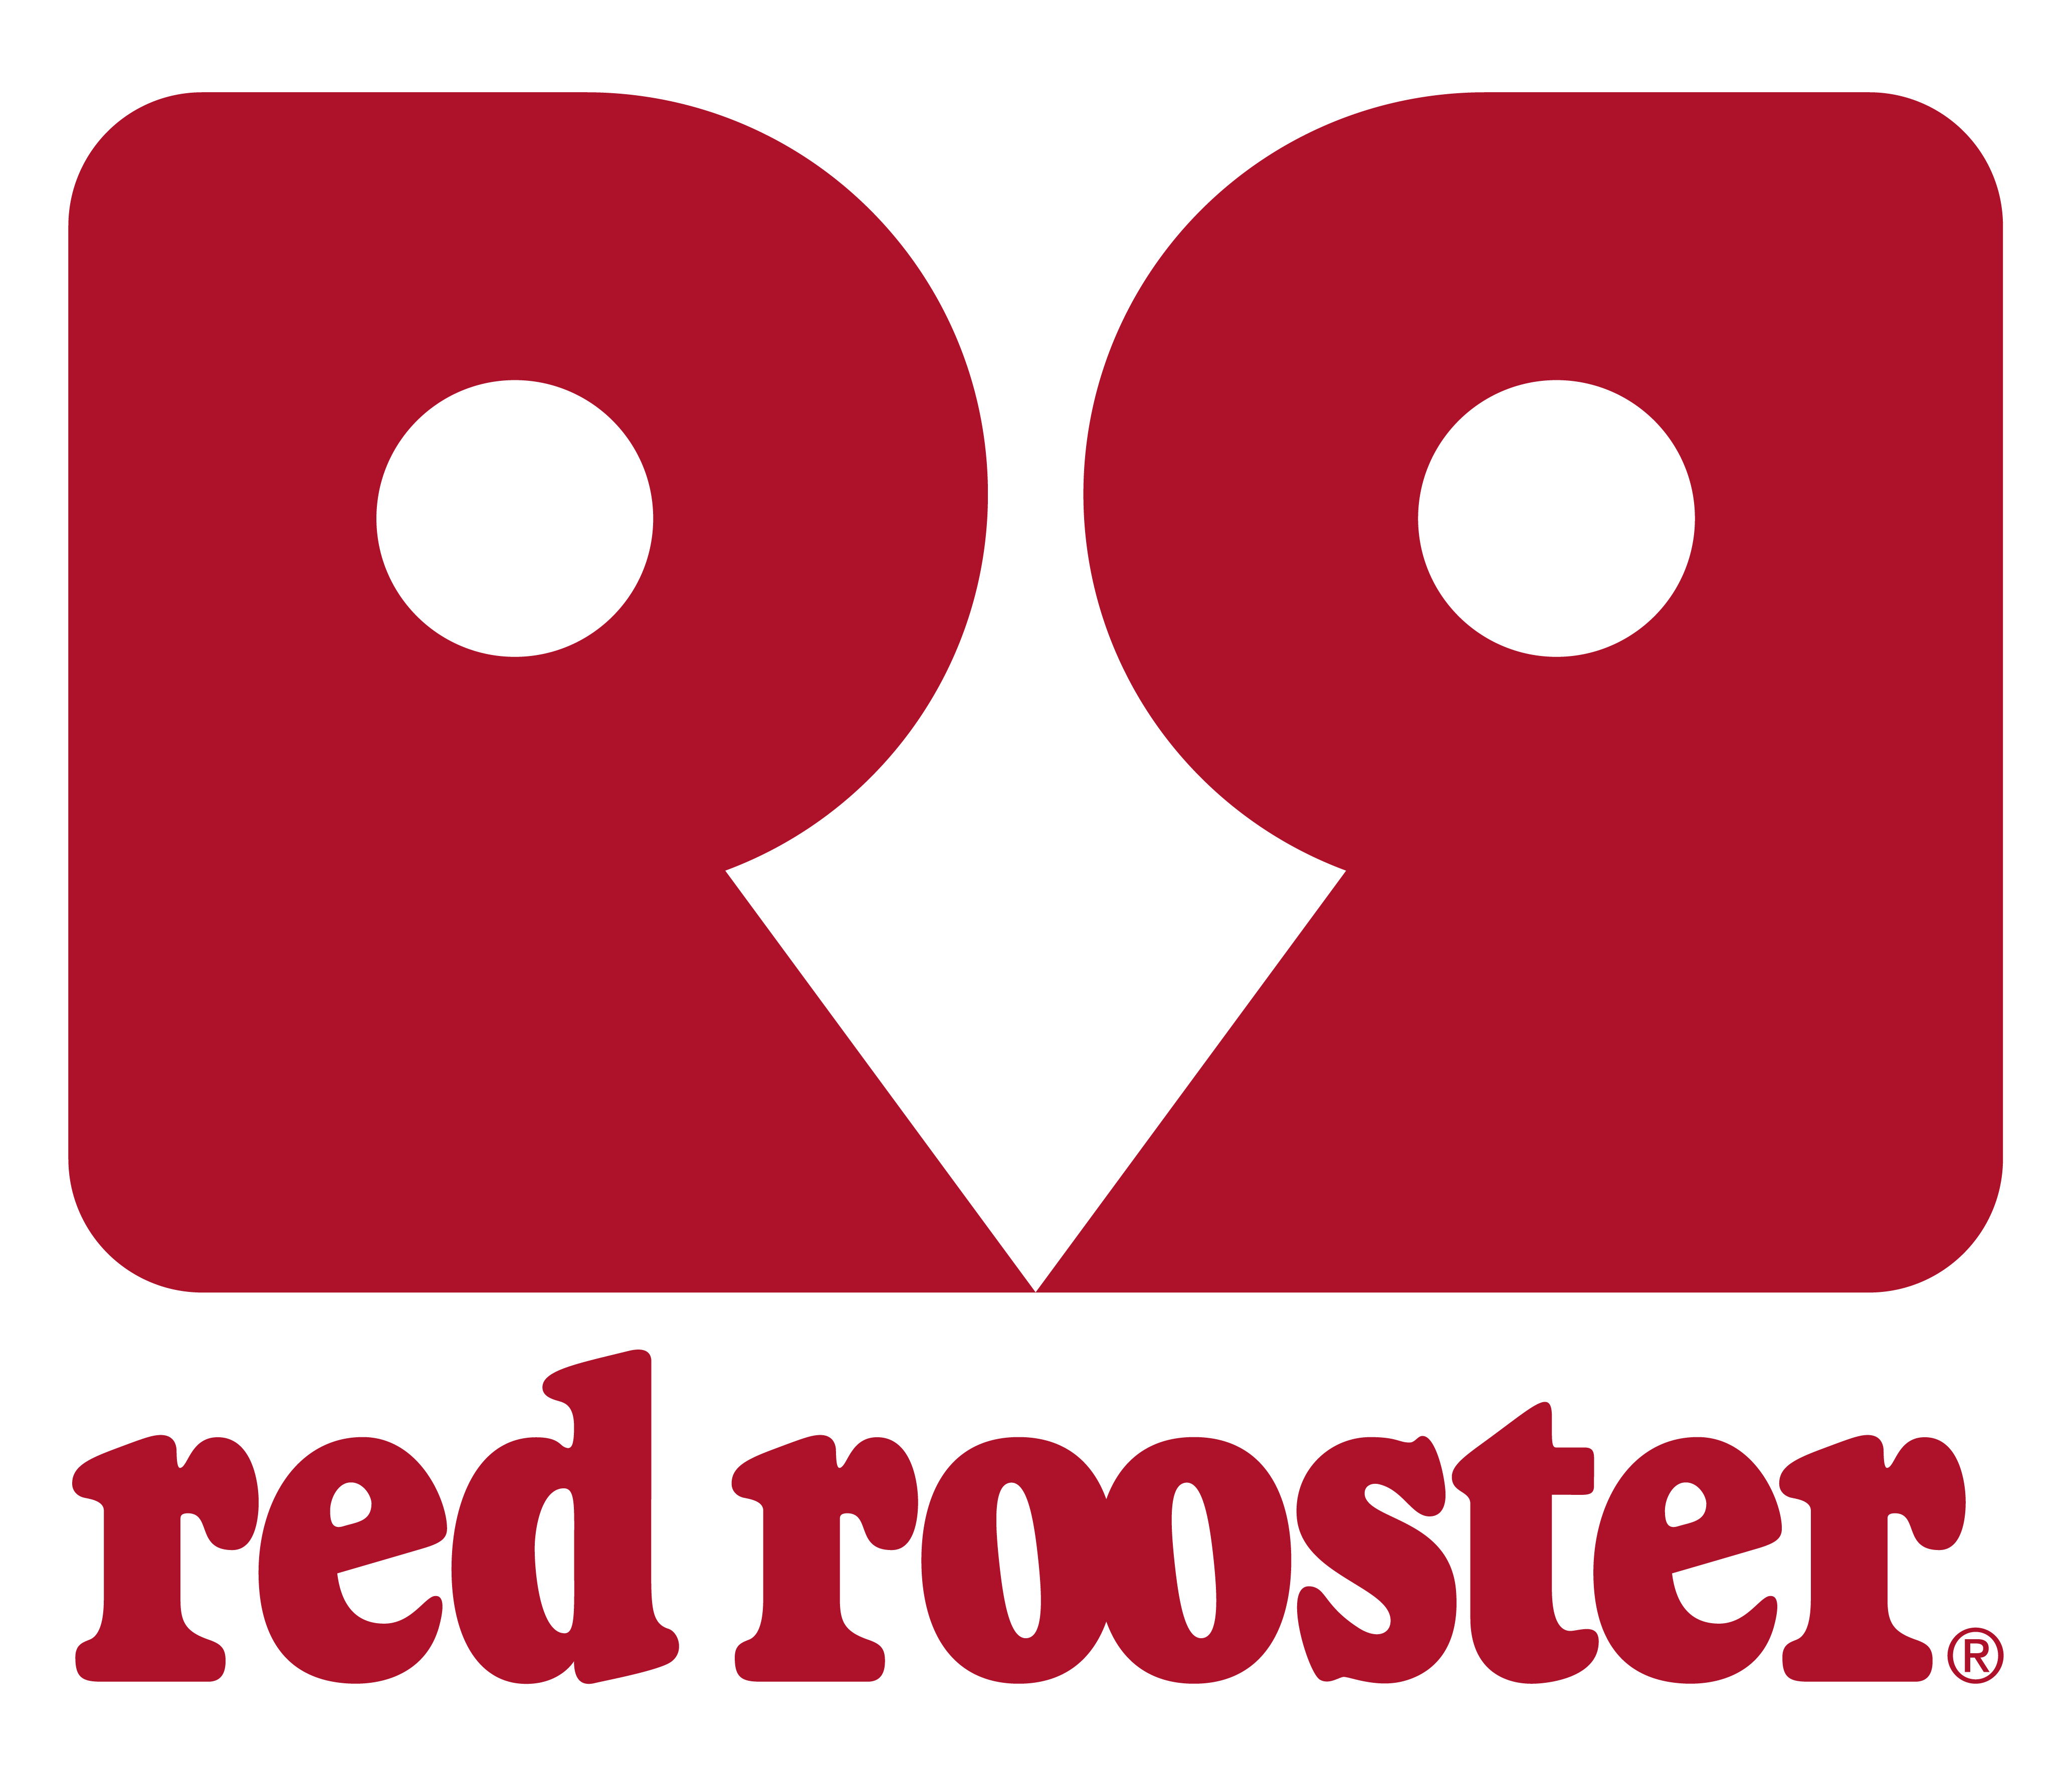 red rooster logo.png